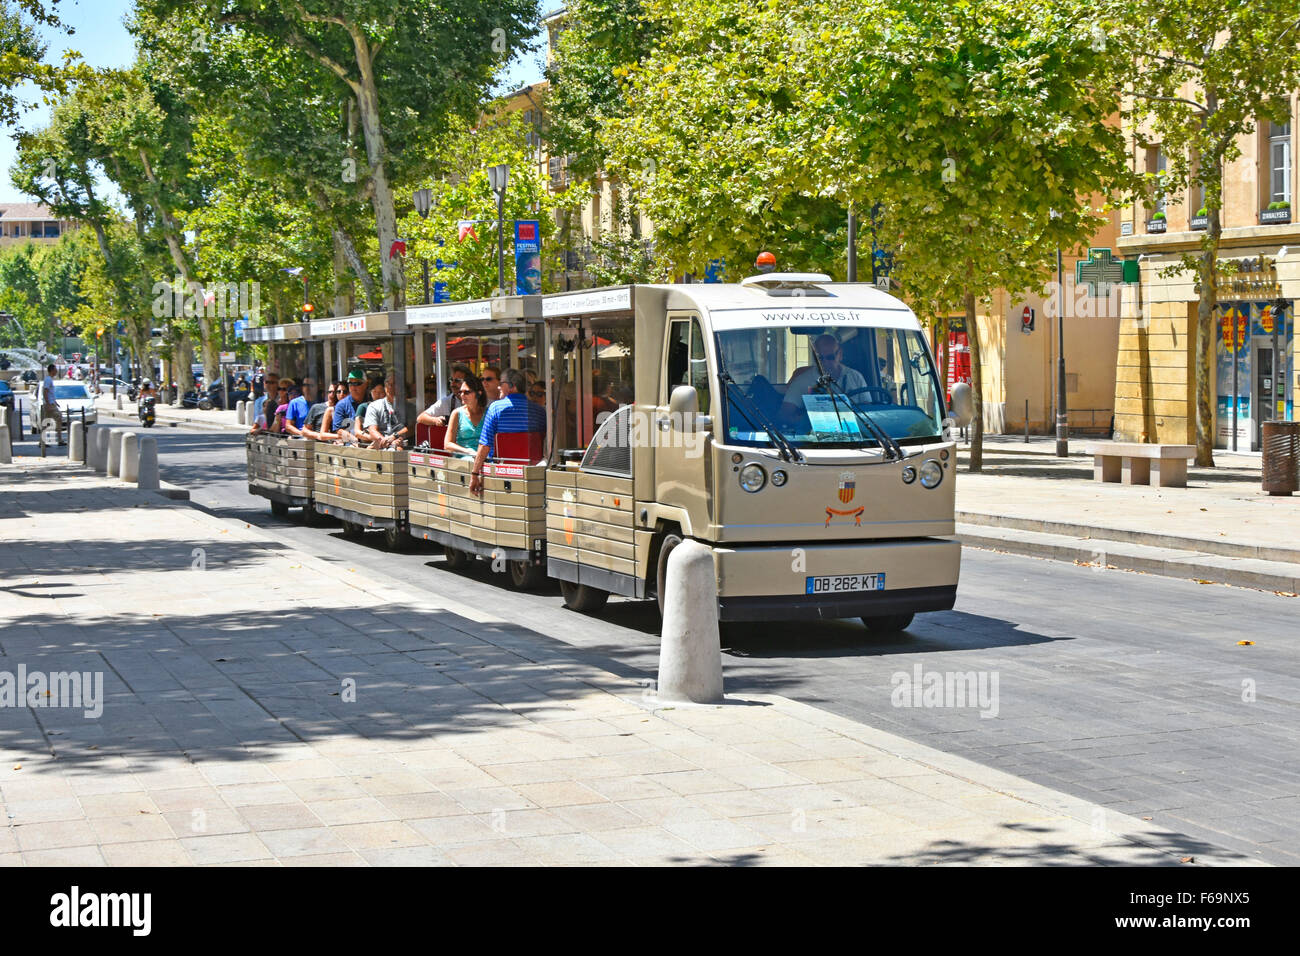 Aix-en-Provence South of France Land train sightseeing trip along the prestigious Cours Mirabeau boulevard on a very hot July day Stock Photo